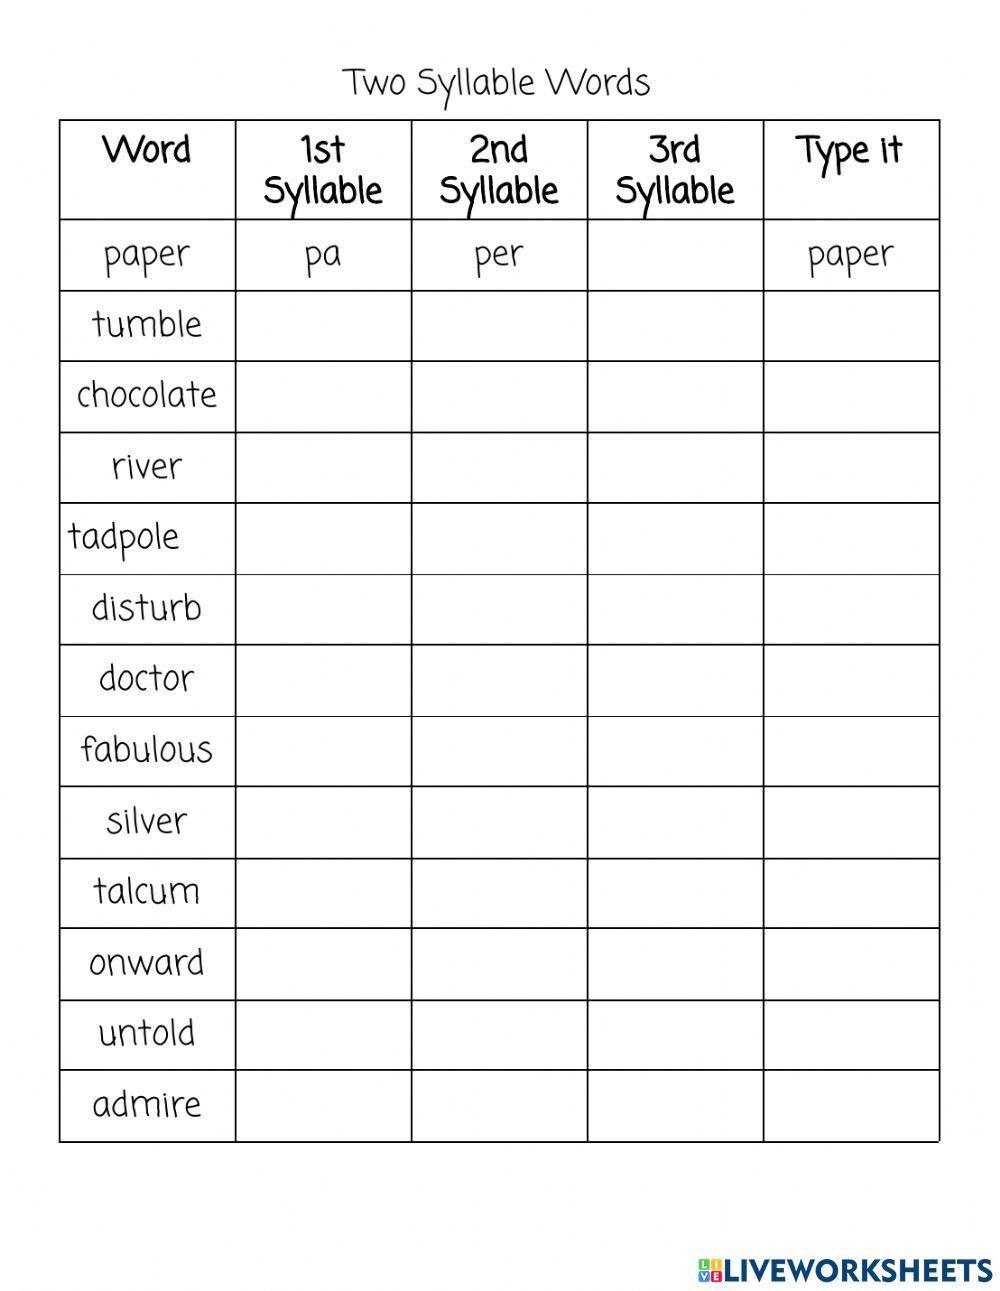 Syllable division